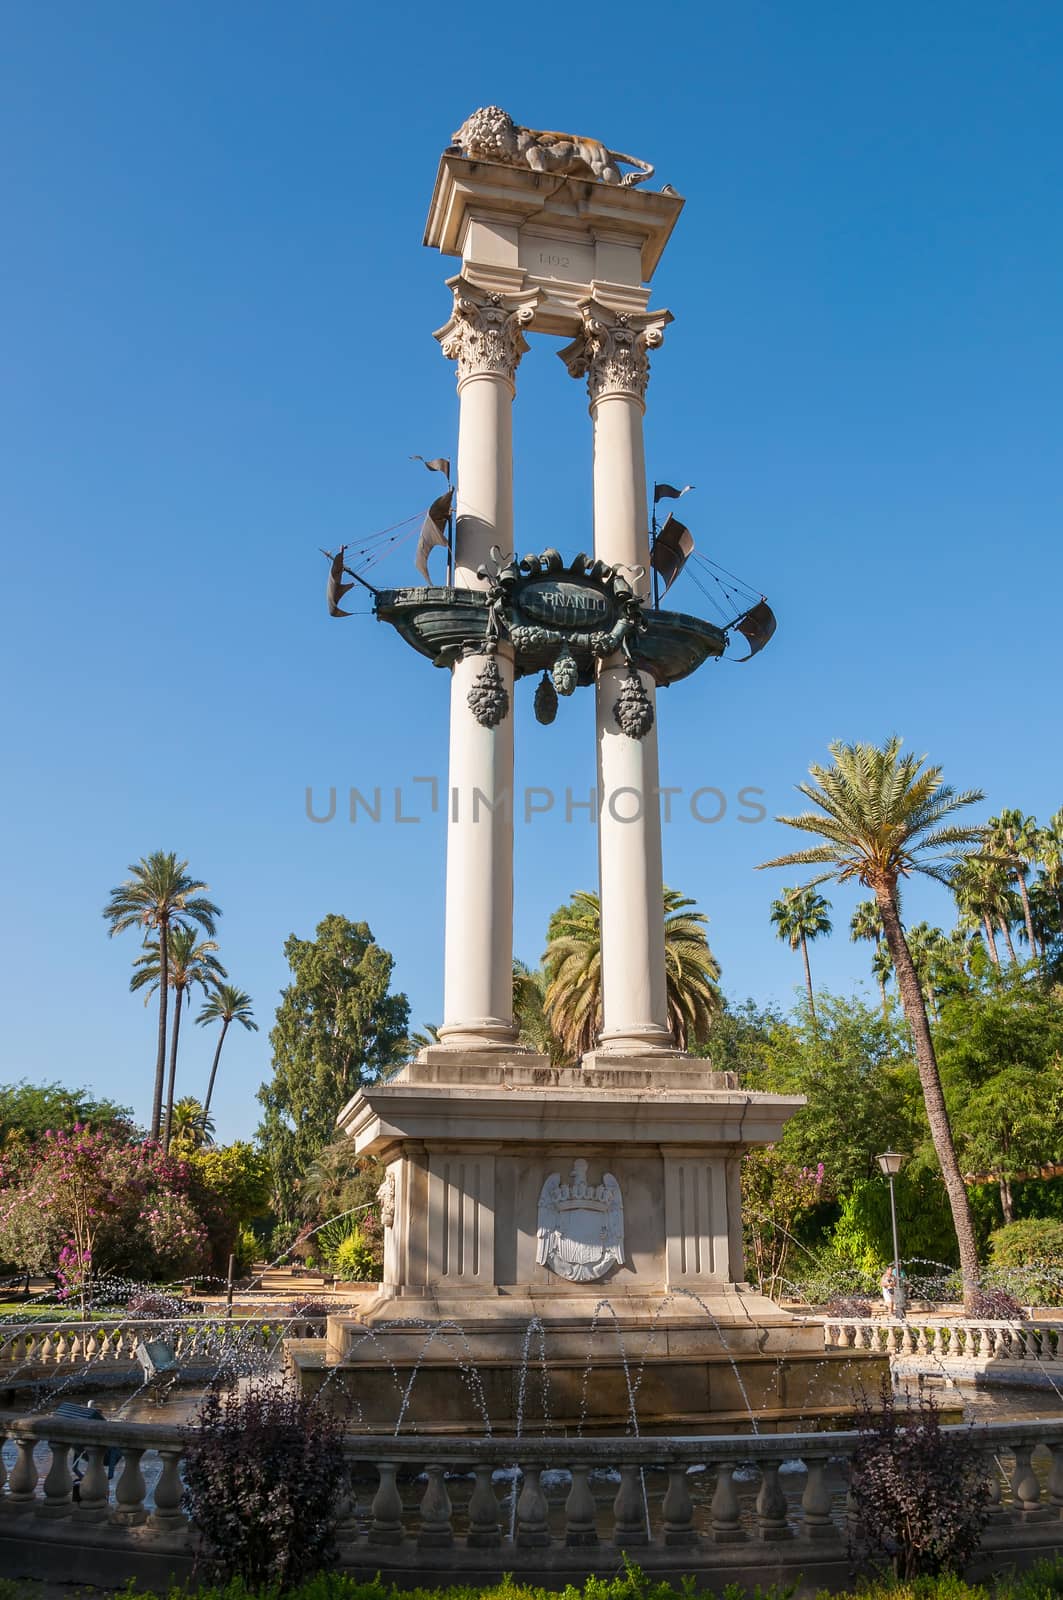 Columbus Monument in Seville, Spain by mkos83